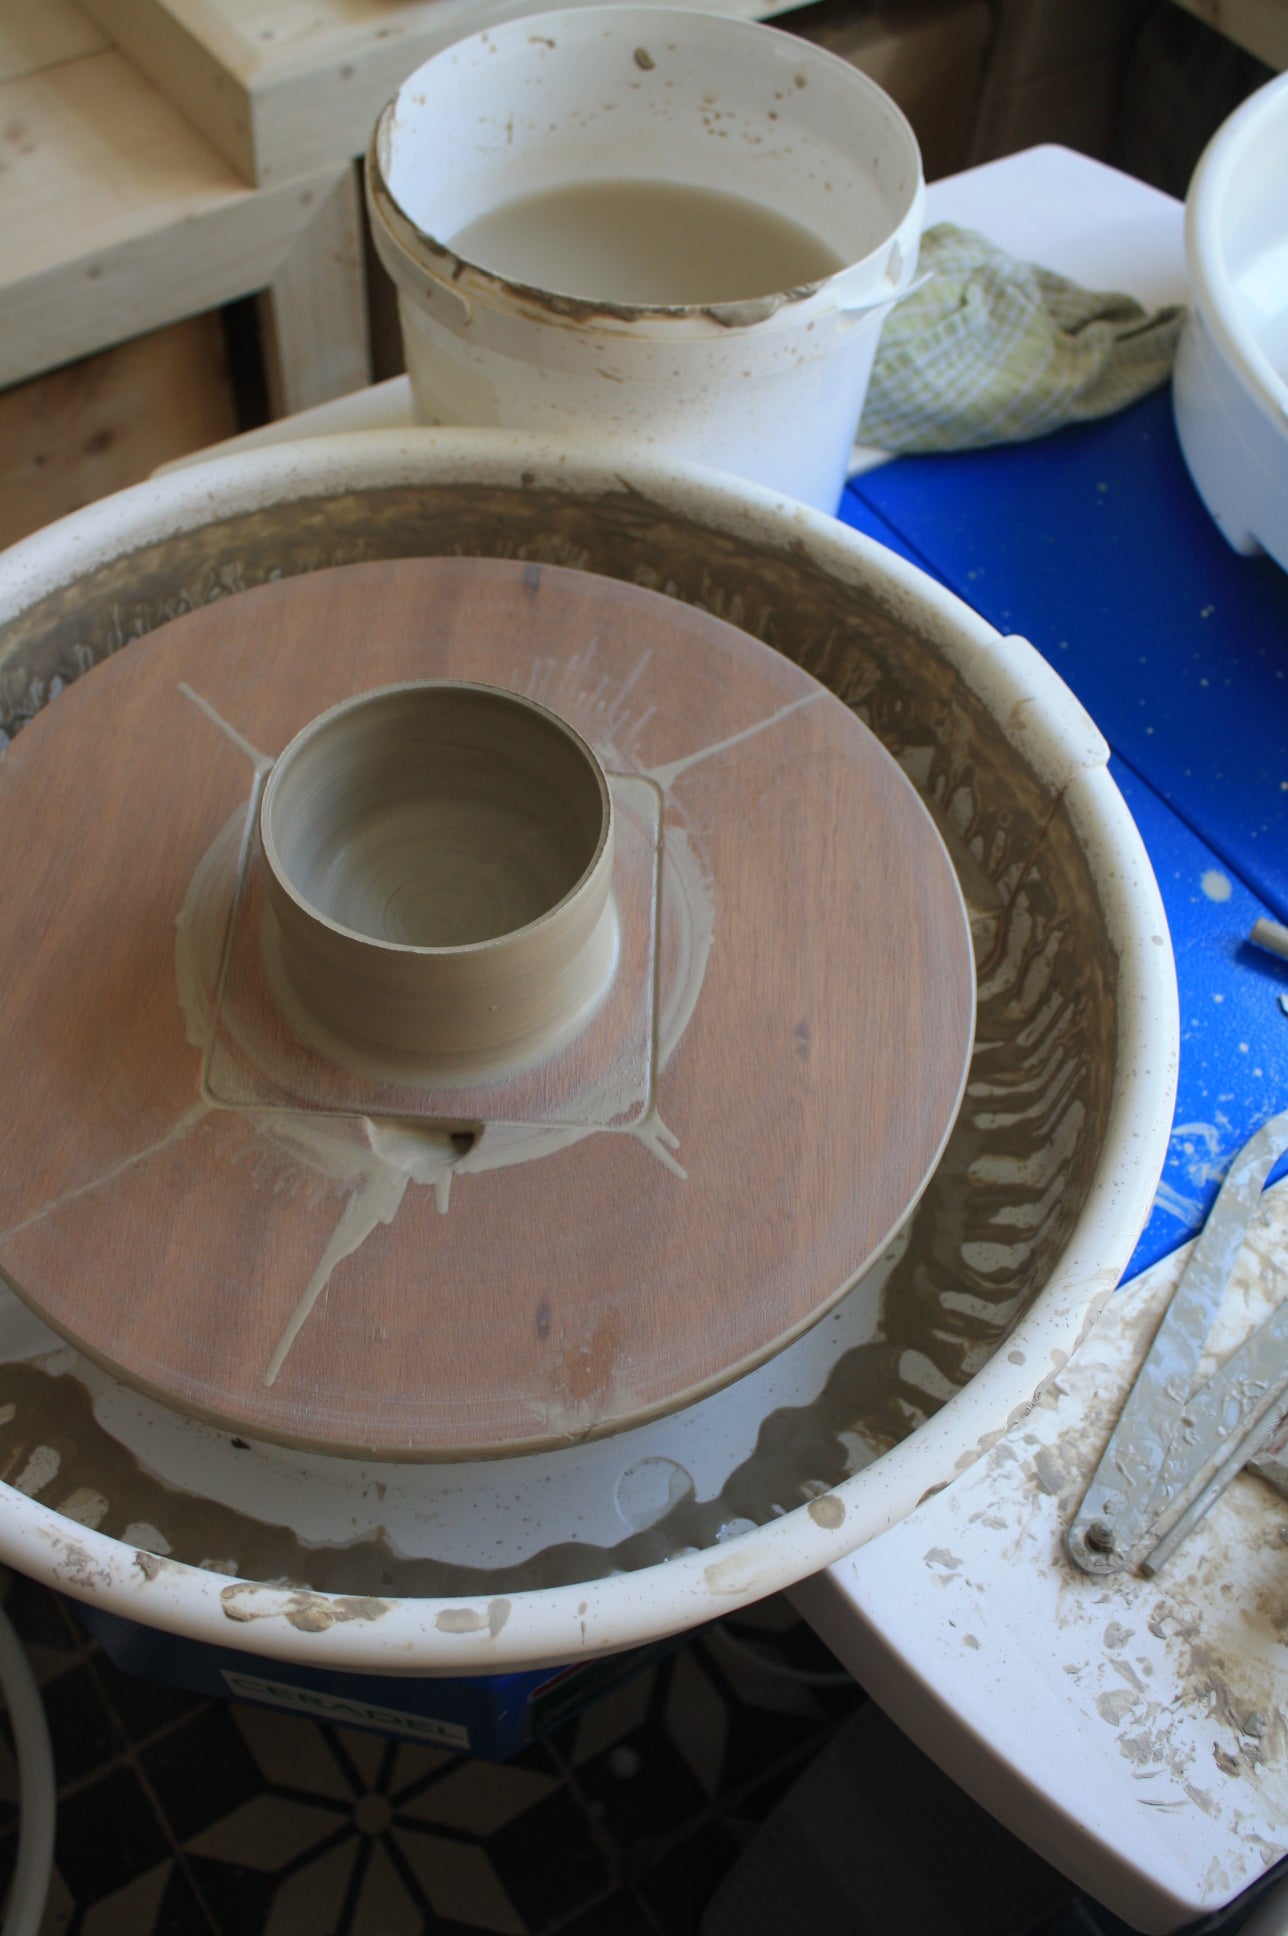 Ceramic Workshop "Throwing on the pottery wheel, a taster class" with Andrea in Bilzen, Belgium by subcultours